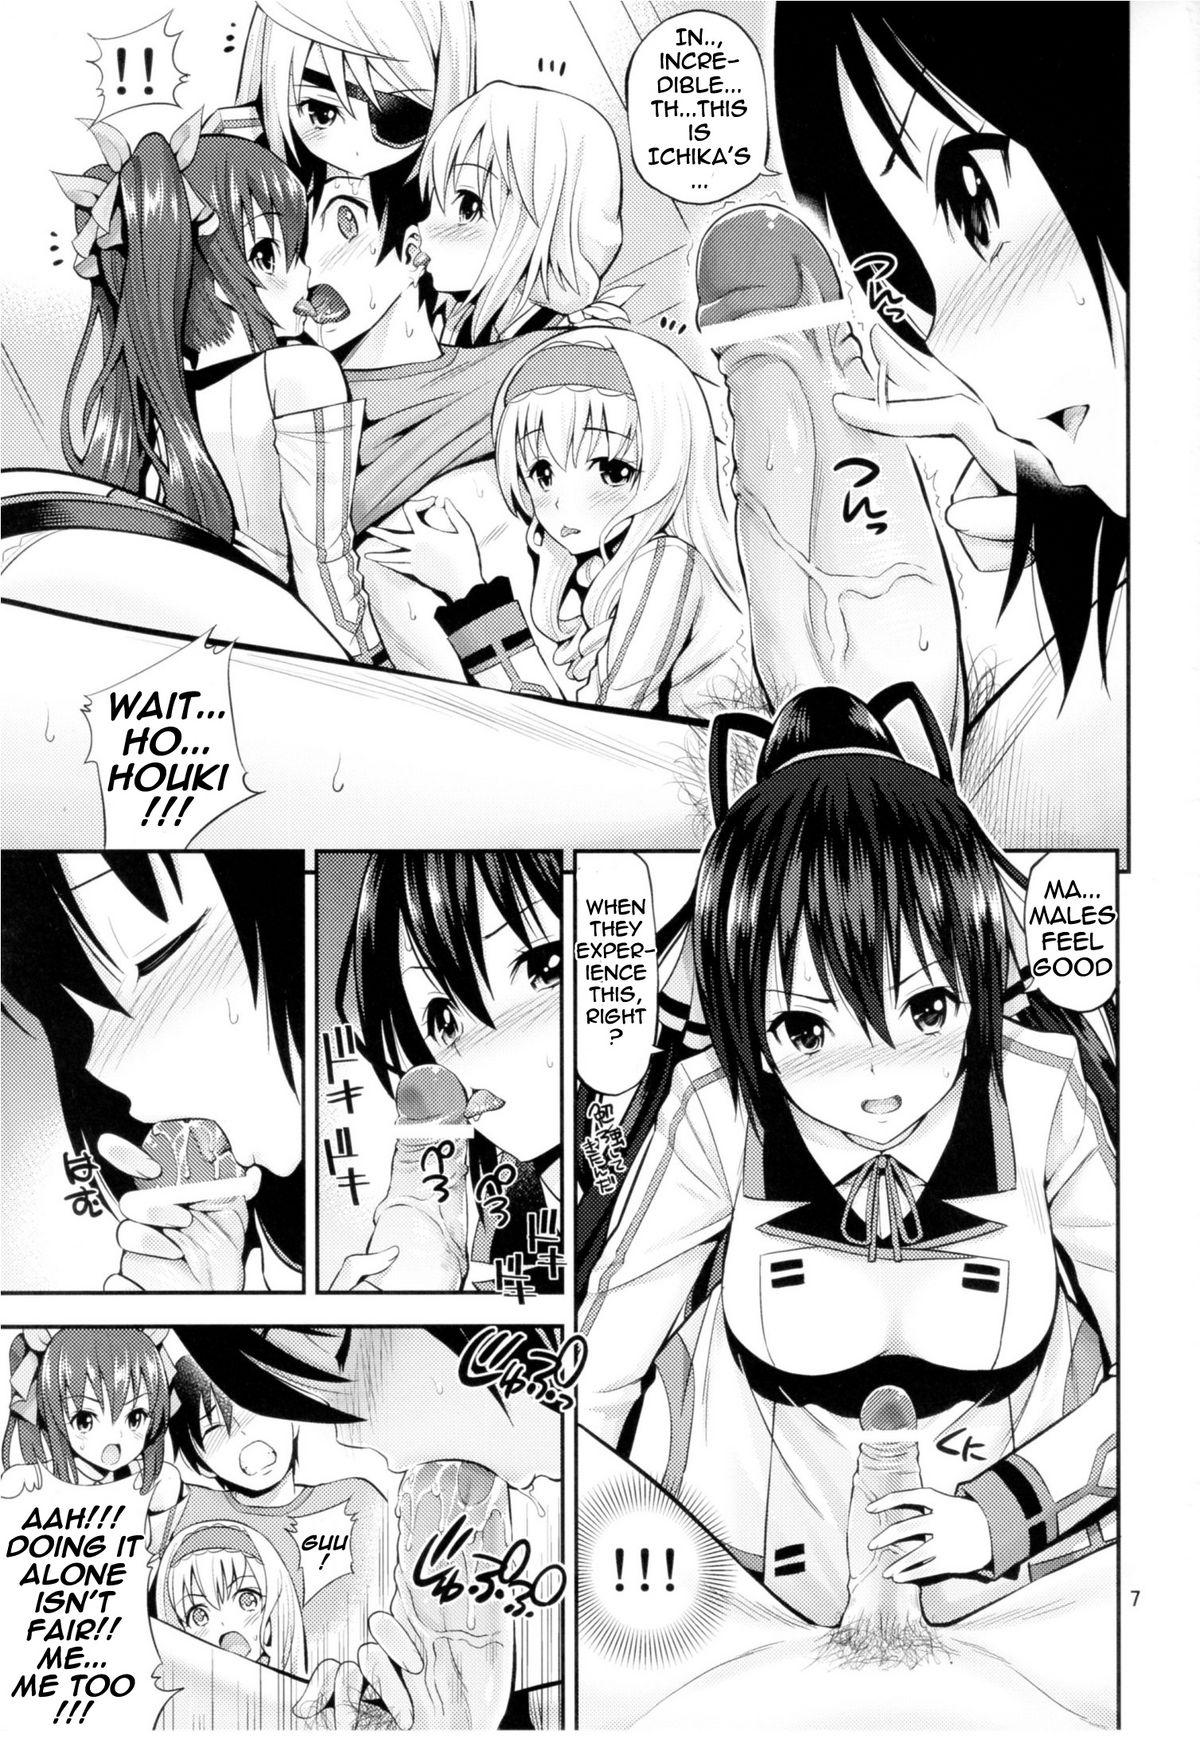 Clothed This is Harlem - Infinite stratos Foda - Page 6